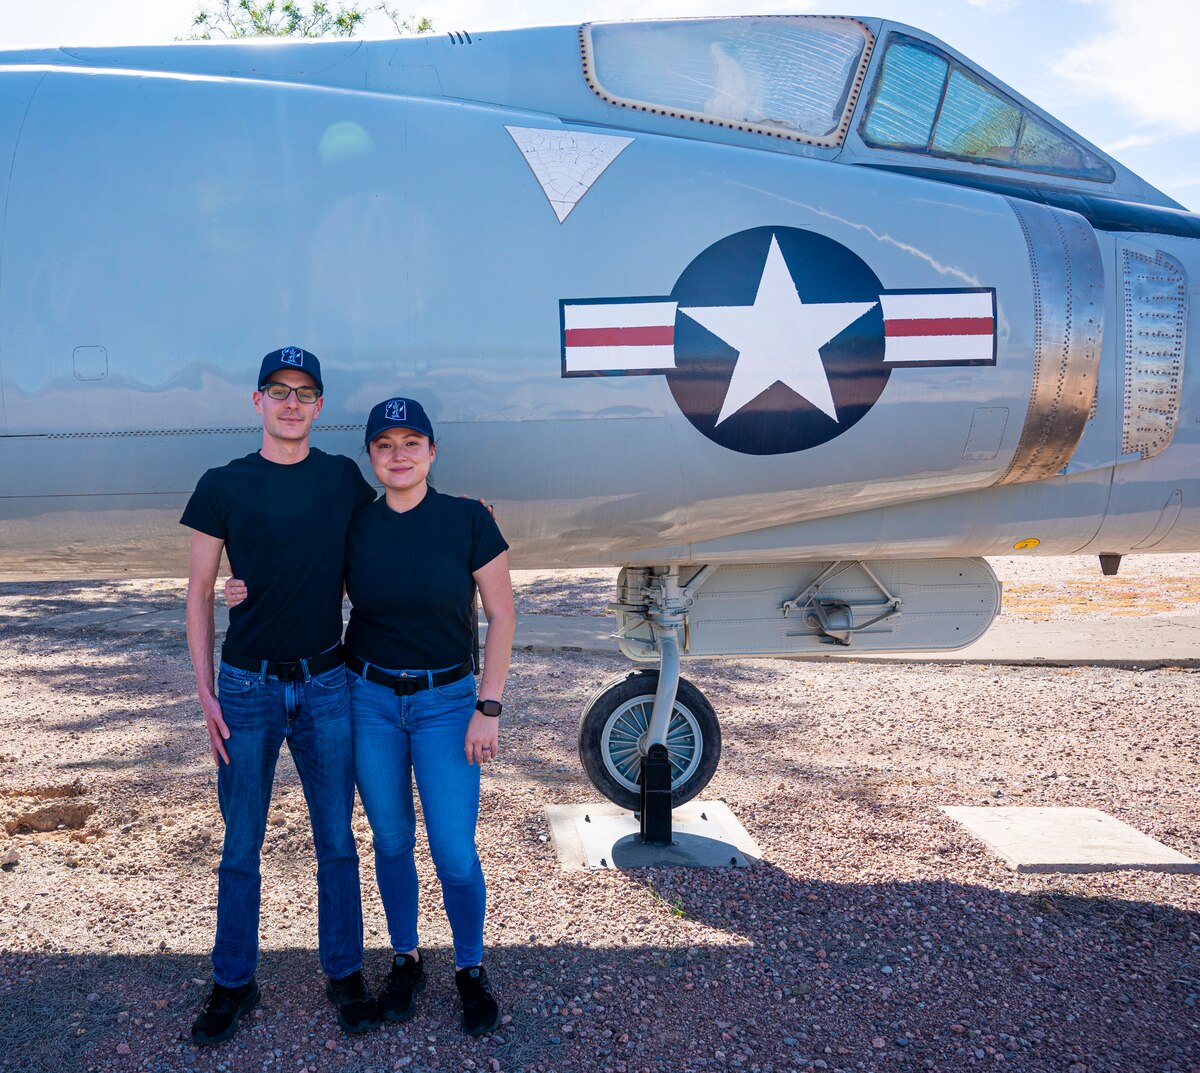 Trainees Melissa McCabe and Alex Waters pose for a photo at the Morris Air National Guard Base heritage park before leaving for Basic Miliary Training together. (U.S. Air National Guard photo by Staff Sgt. Van Whatcott)